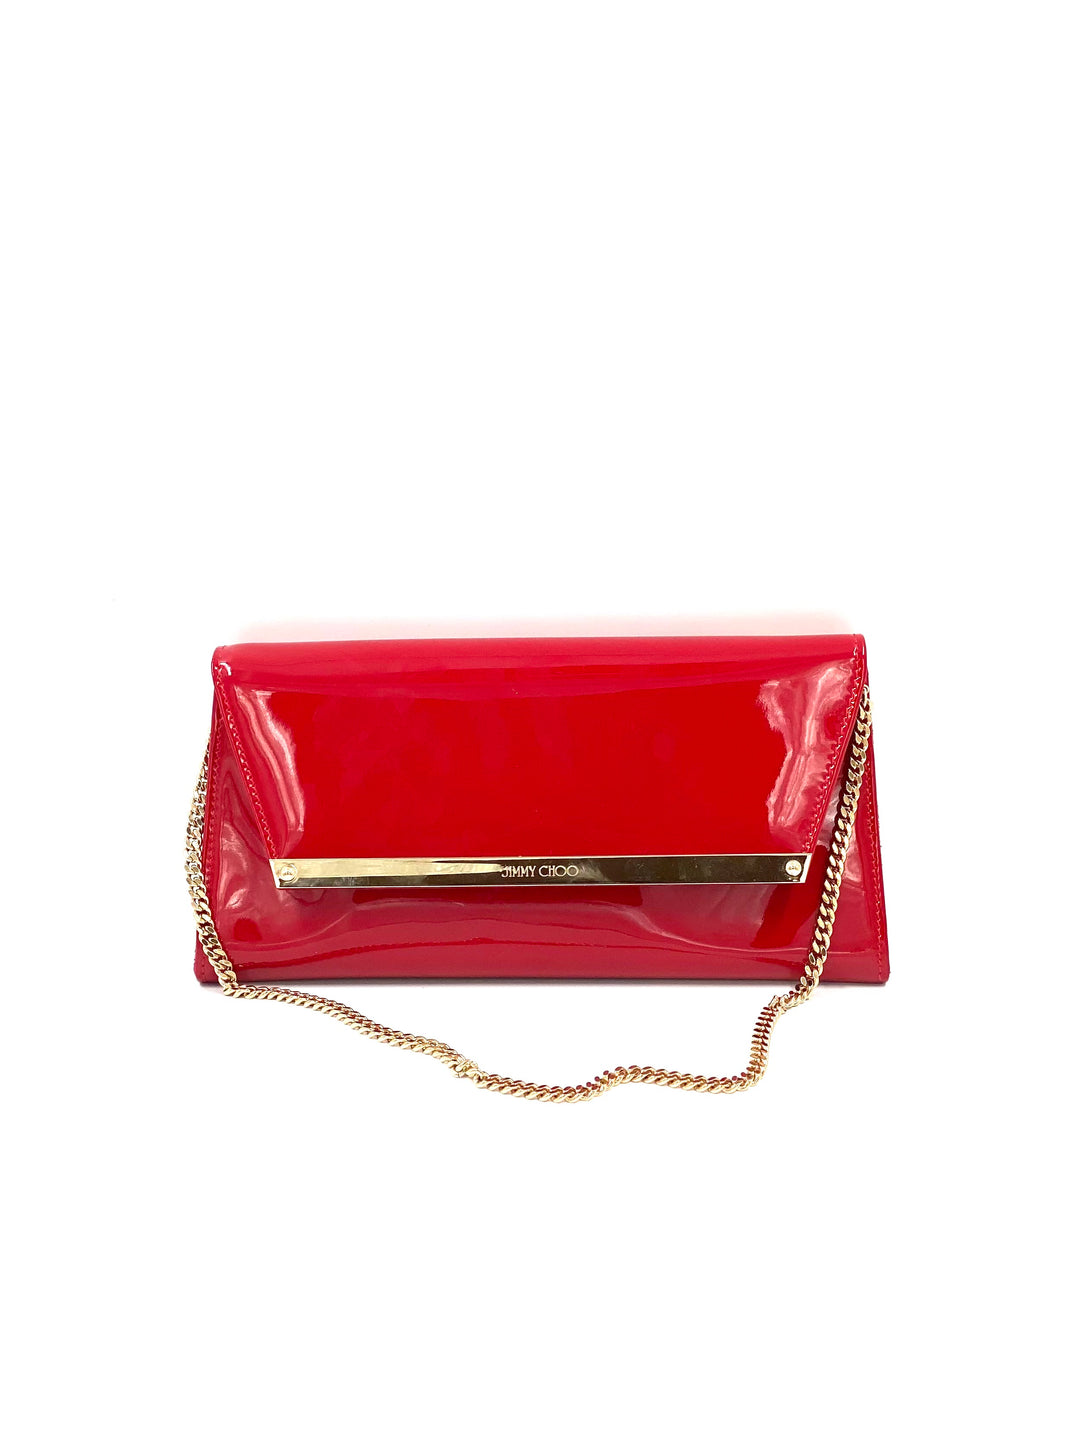 Jimmy Choo Margot Patent Leather Chain Clutch Red